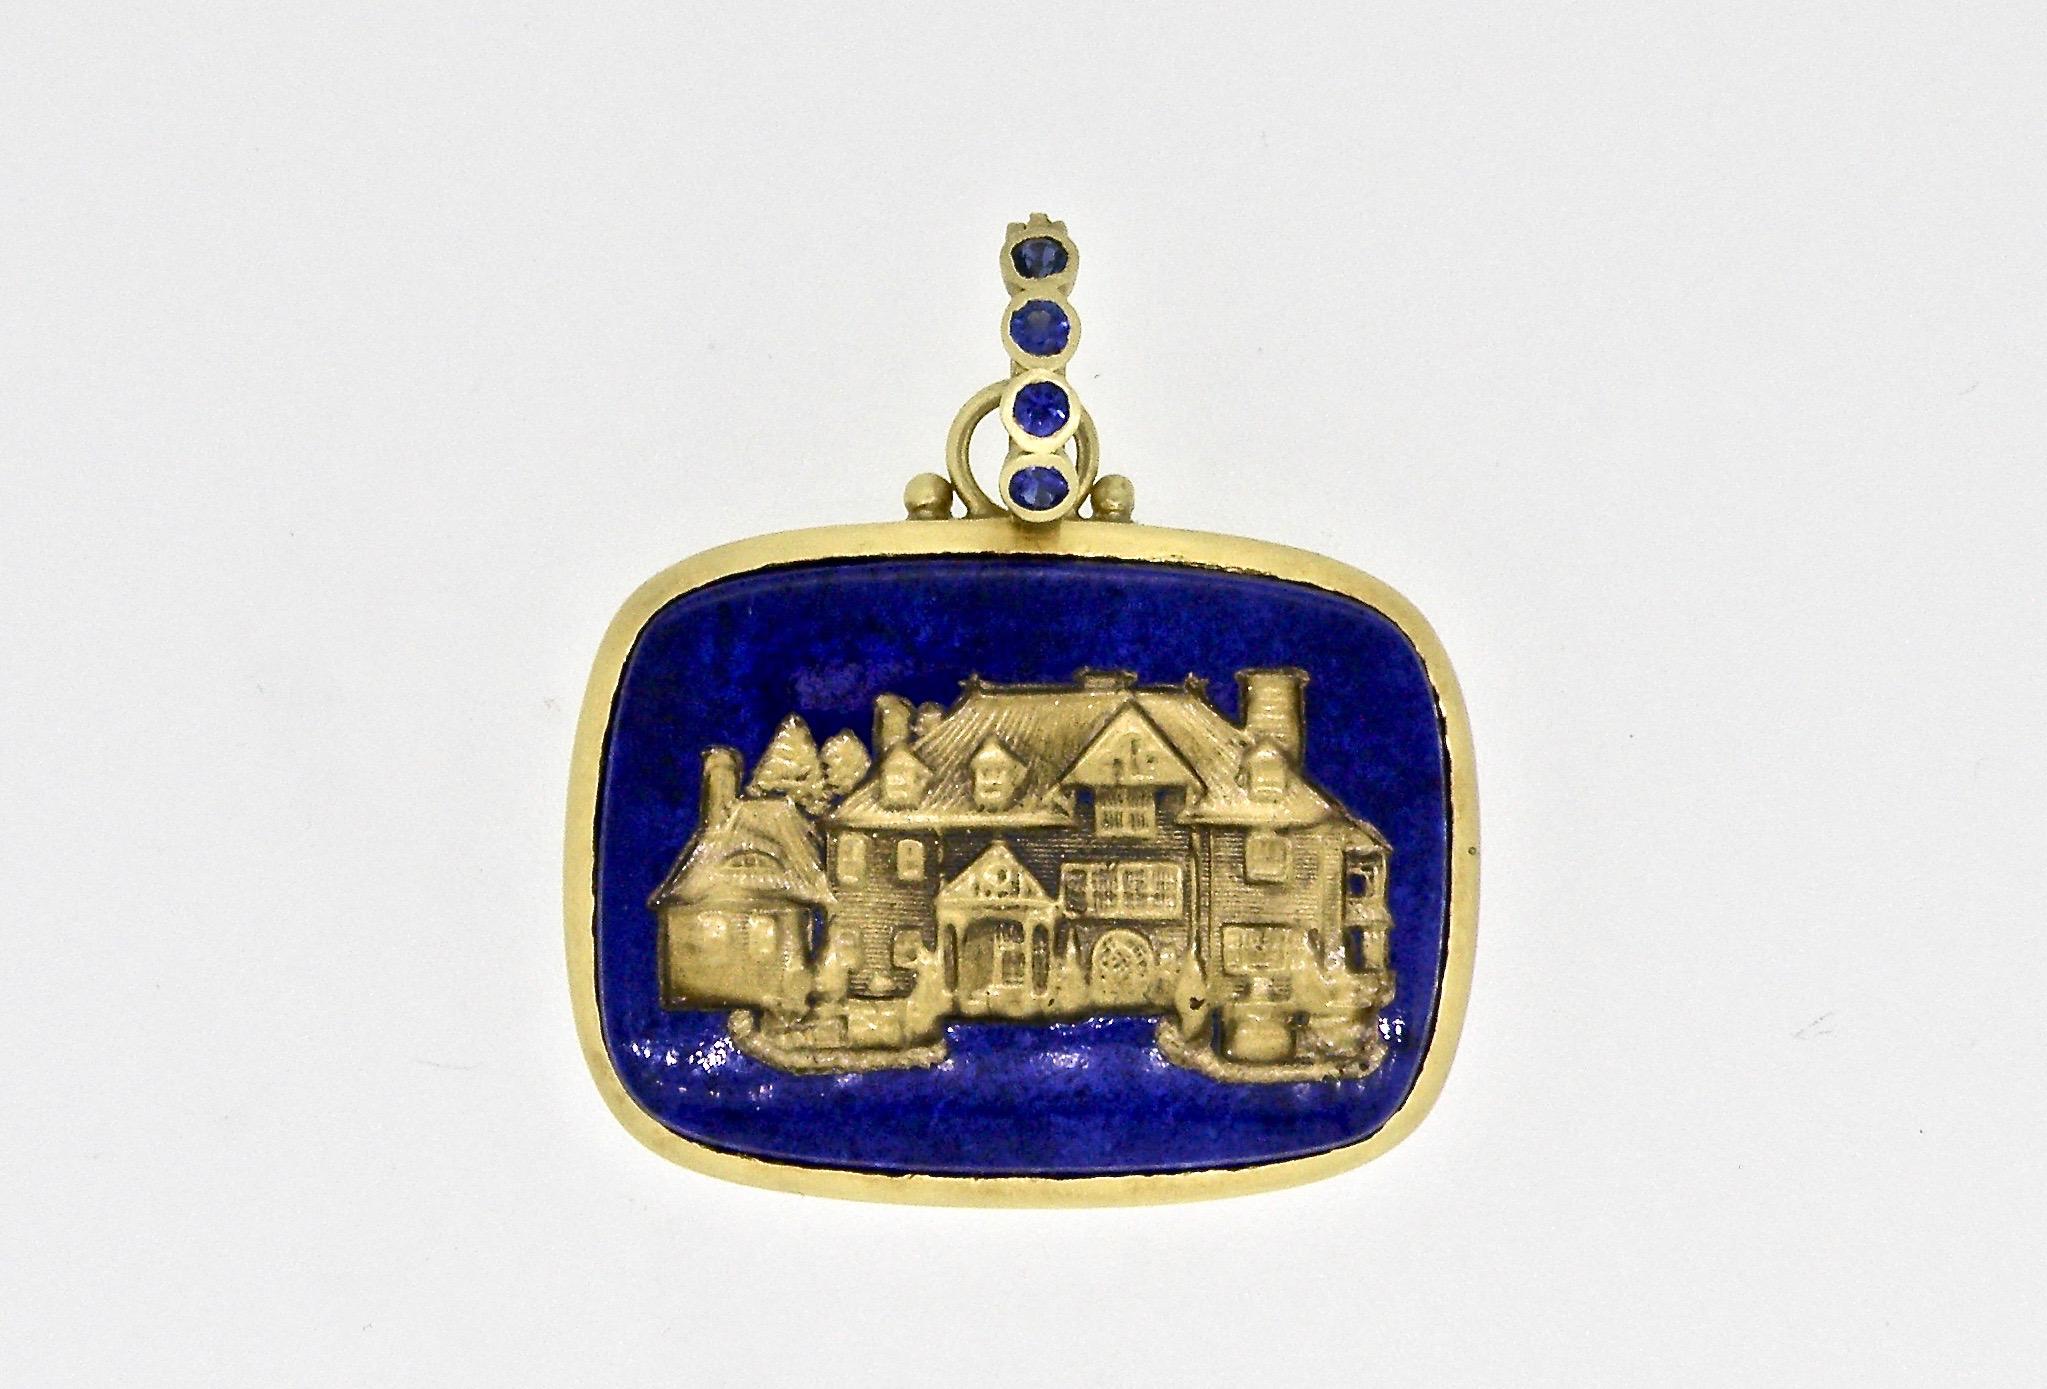 One of a kind 18K Lapis Lazuli pendant 25mm x 15 mm.
18K 3 strand enamel custom chain inlaid with gold colored 